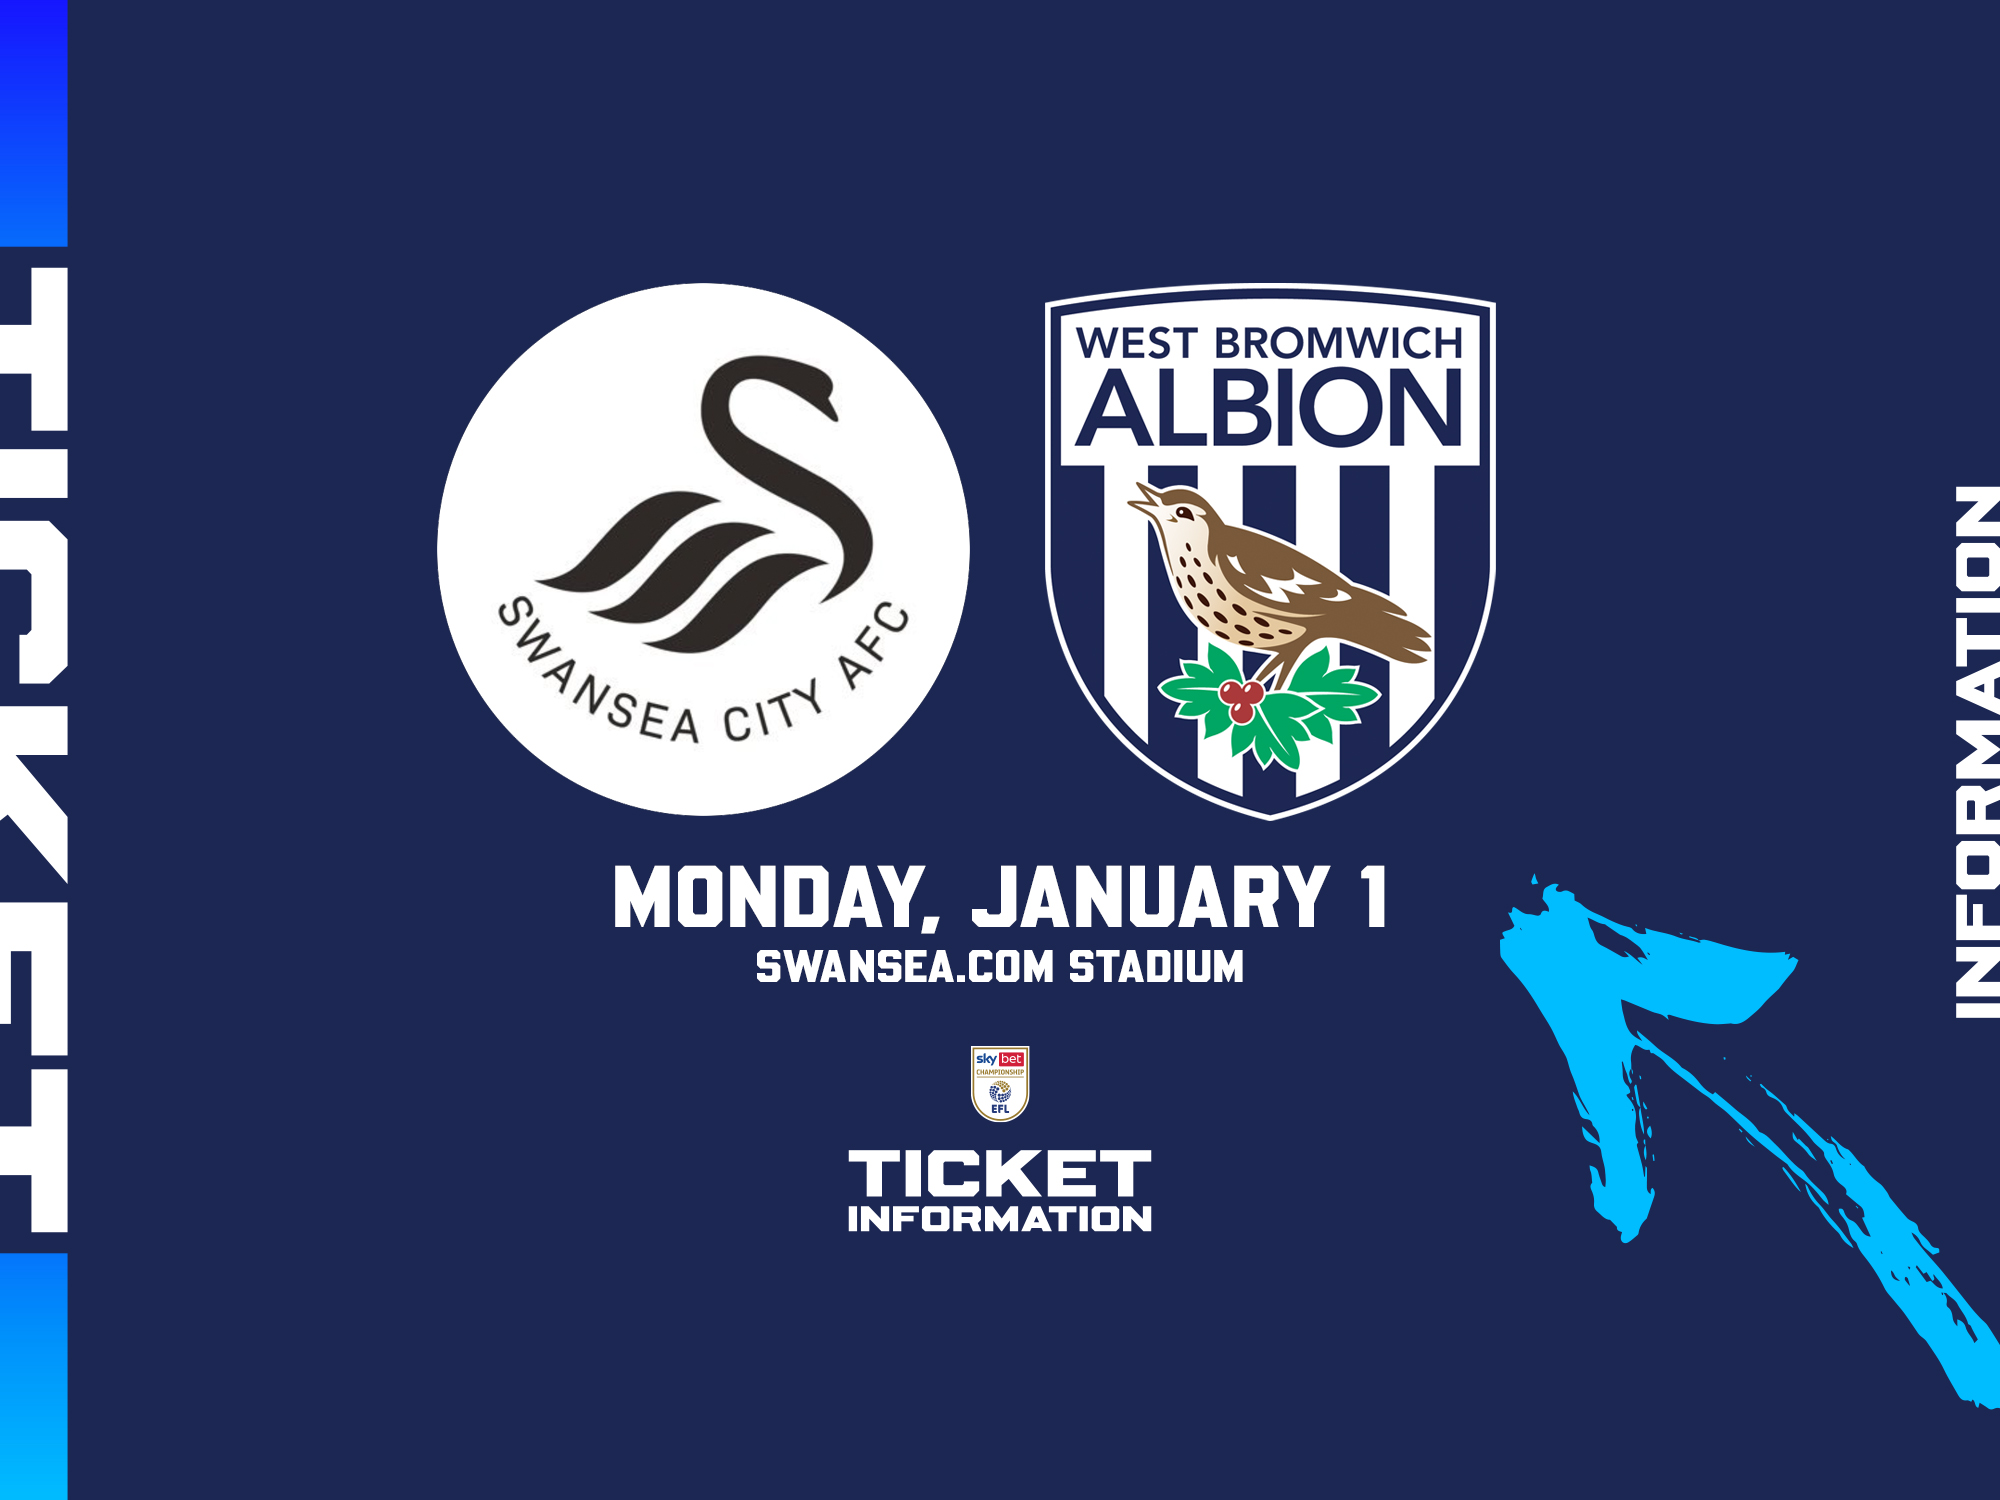 A ticket graphic displaying information for Albion's game against Swansea City